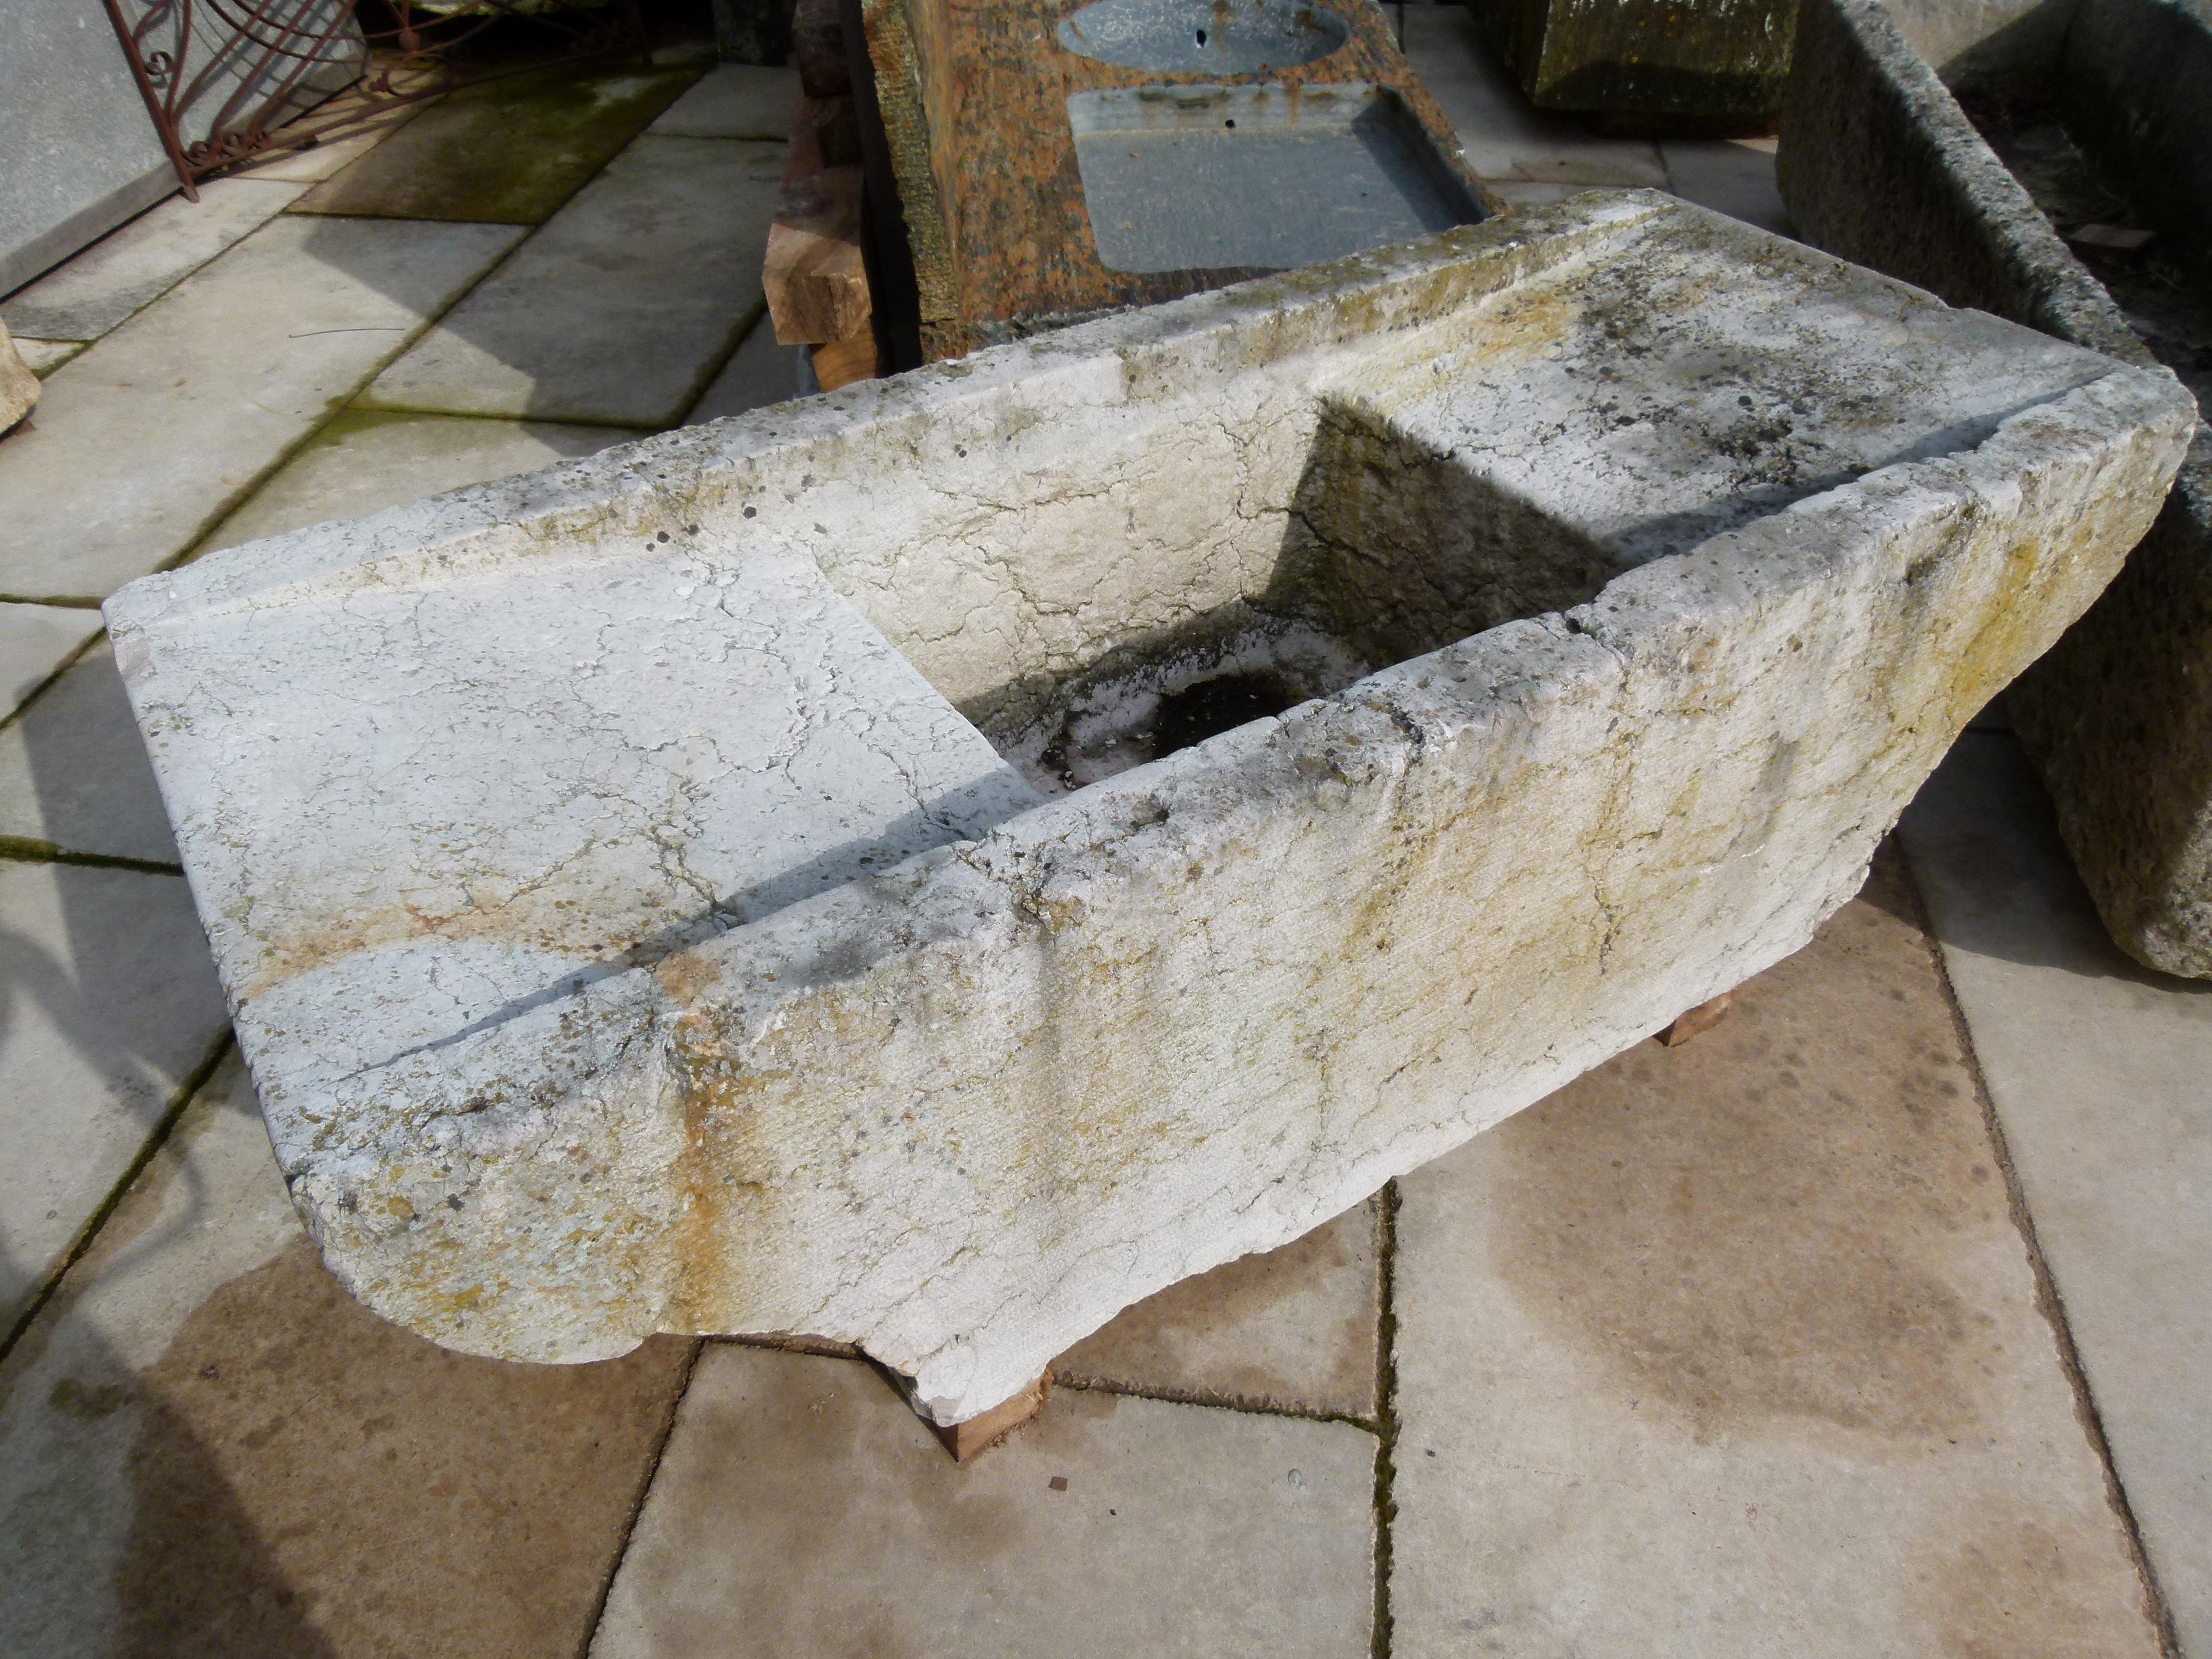 19th century limestone sink. The perfect object for your garden!